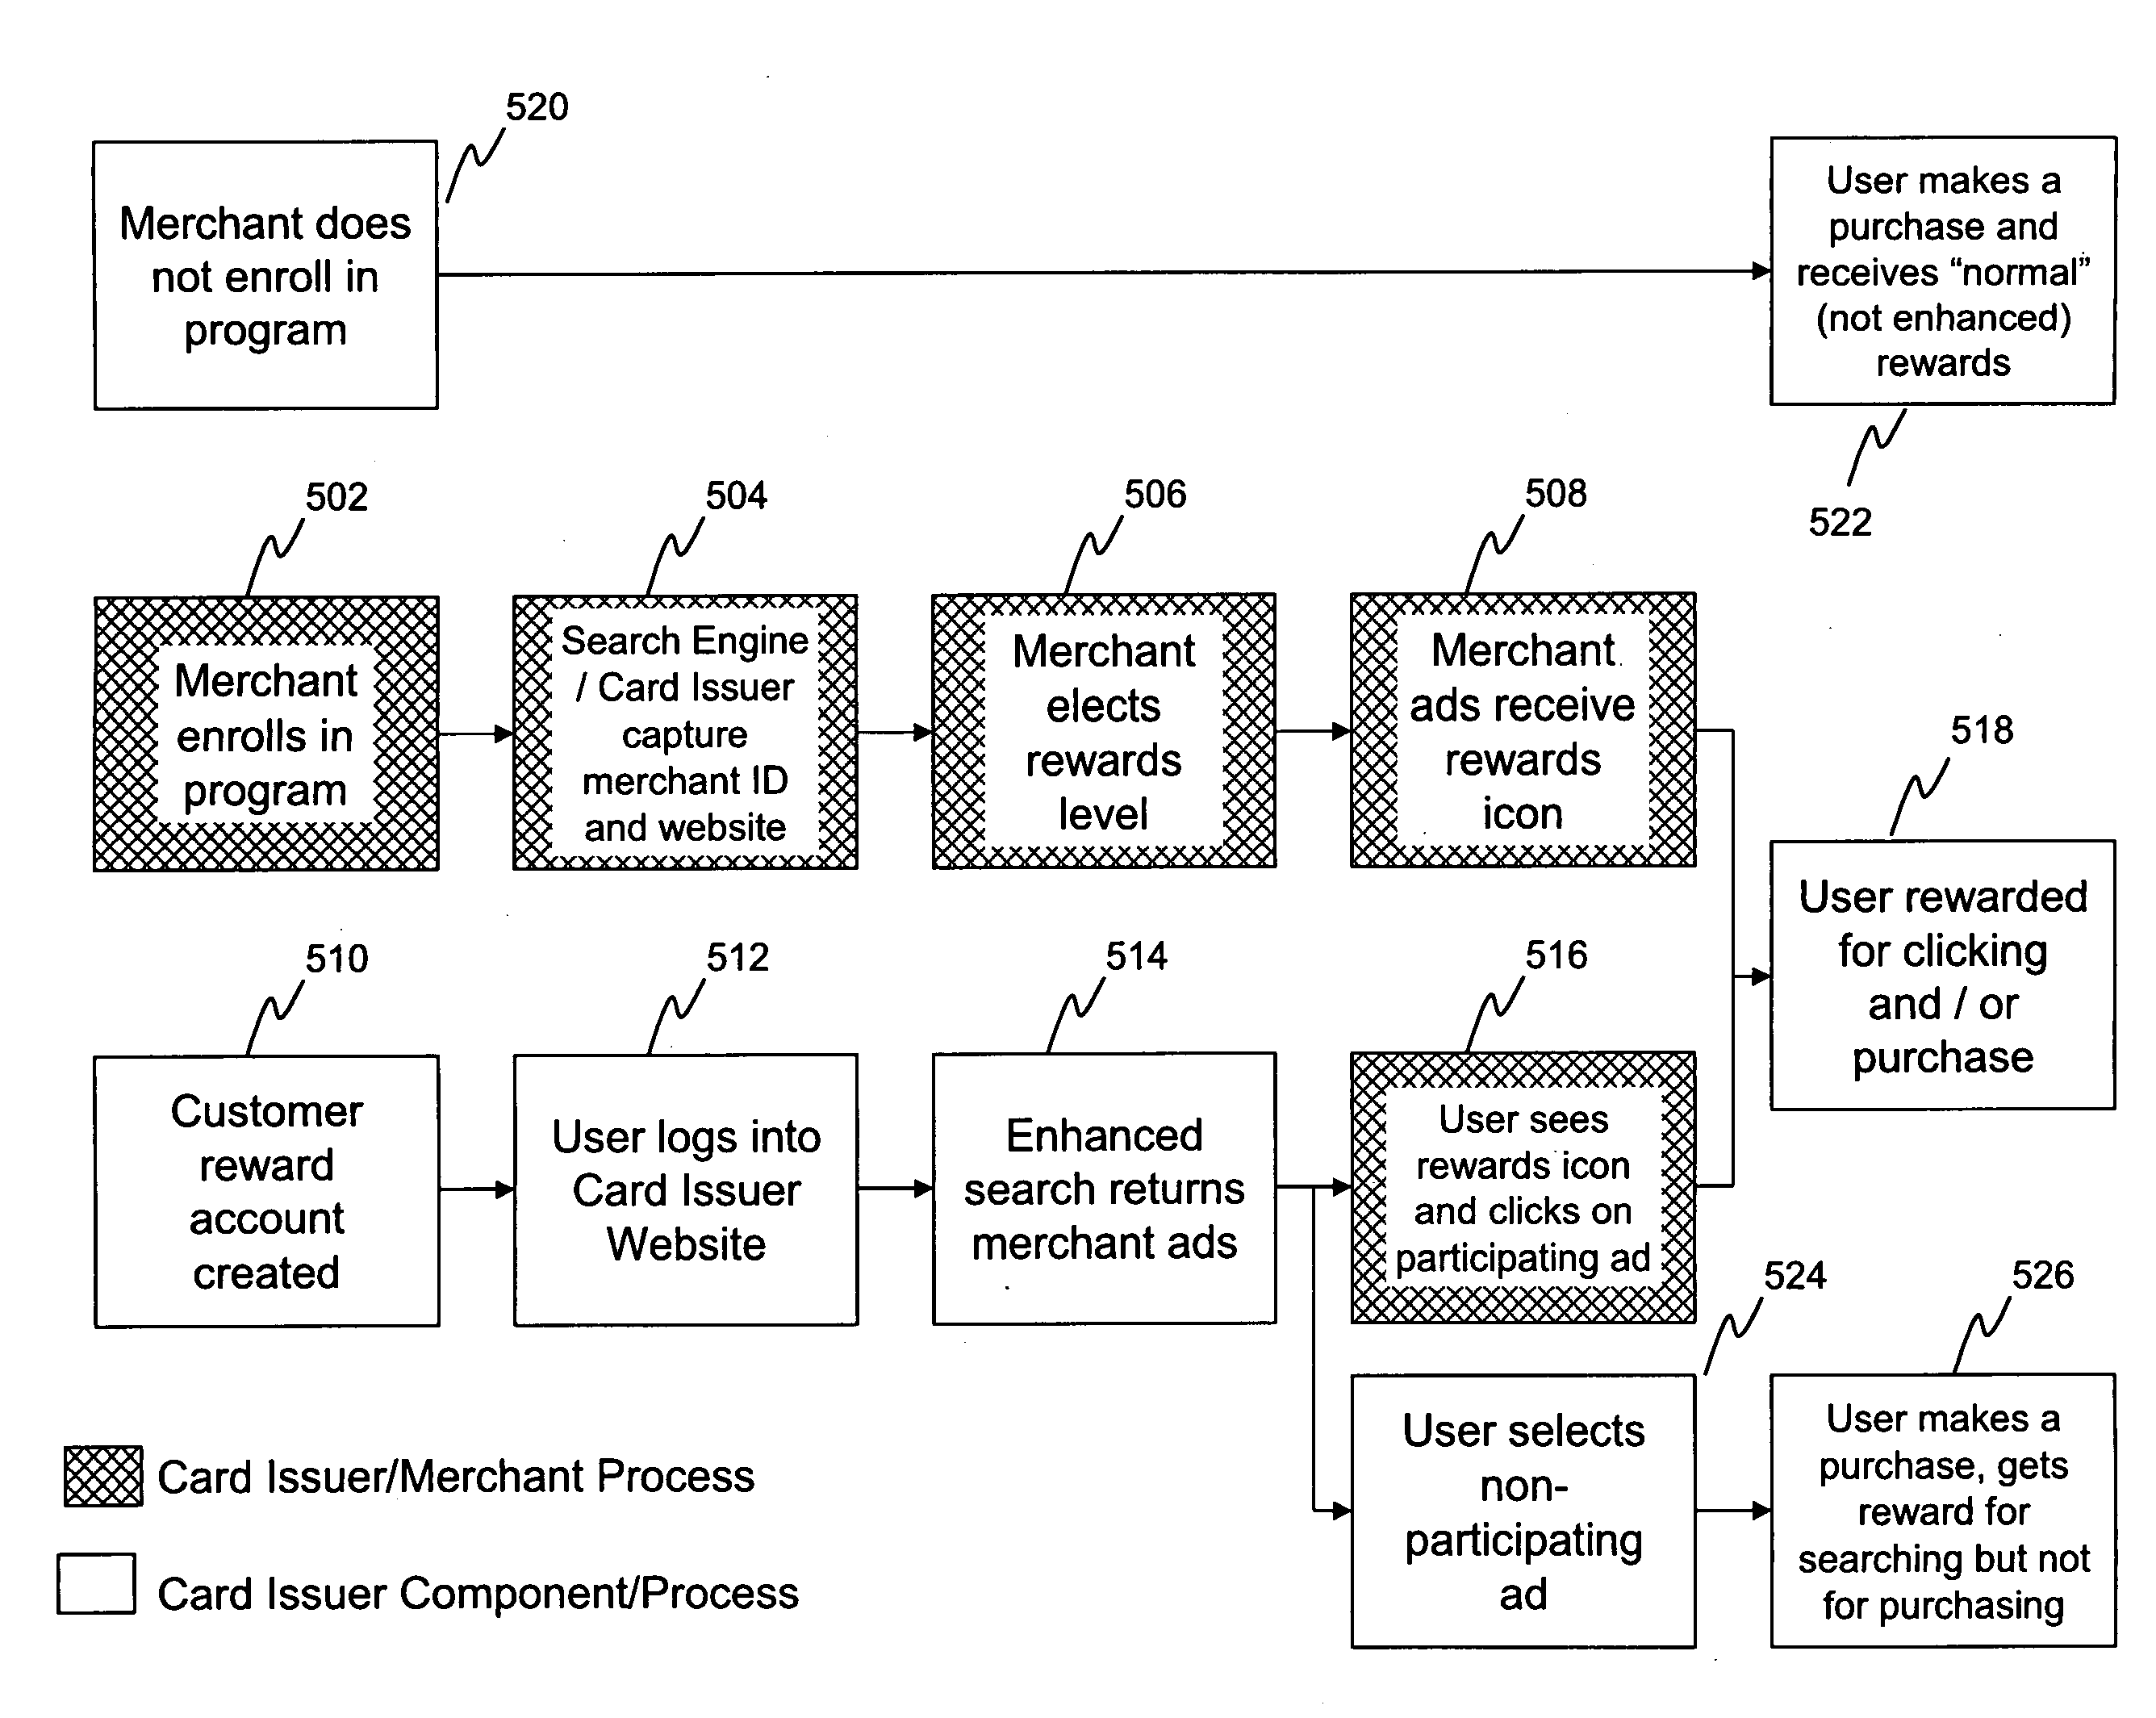 Systems, methods, apparatus and computer program products for interfacing payment systems to a network associated with a referral